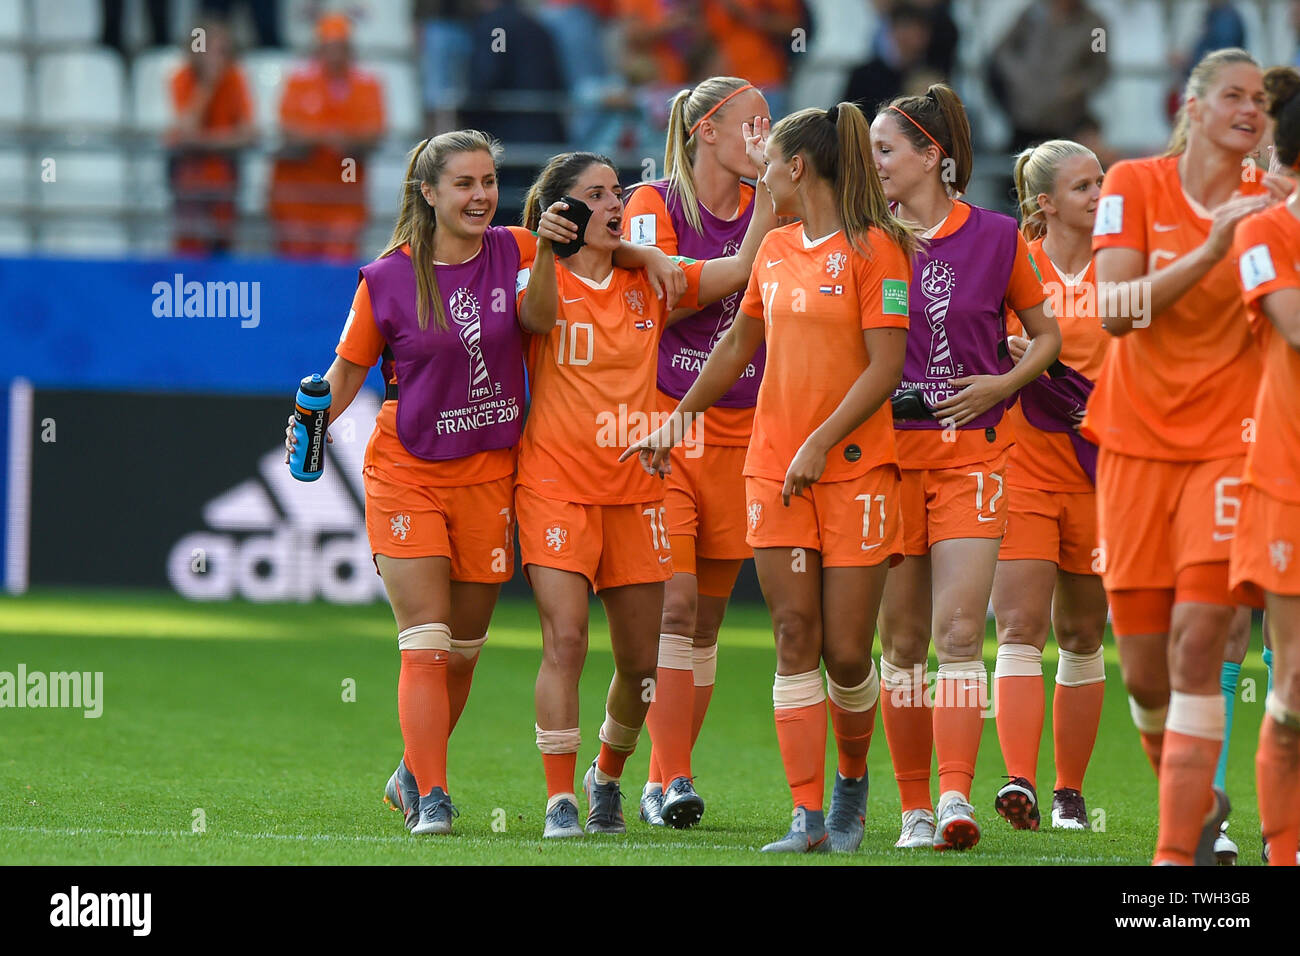 20 june 2019 Reims, France Soccer Women's World Cup France 2019: The  Netherlands v Canada Victoria Pelova of The Netherlands, Danielle van de  Donk of The Netherlands, Lieke Martens of The Netherlands